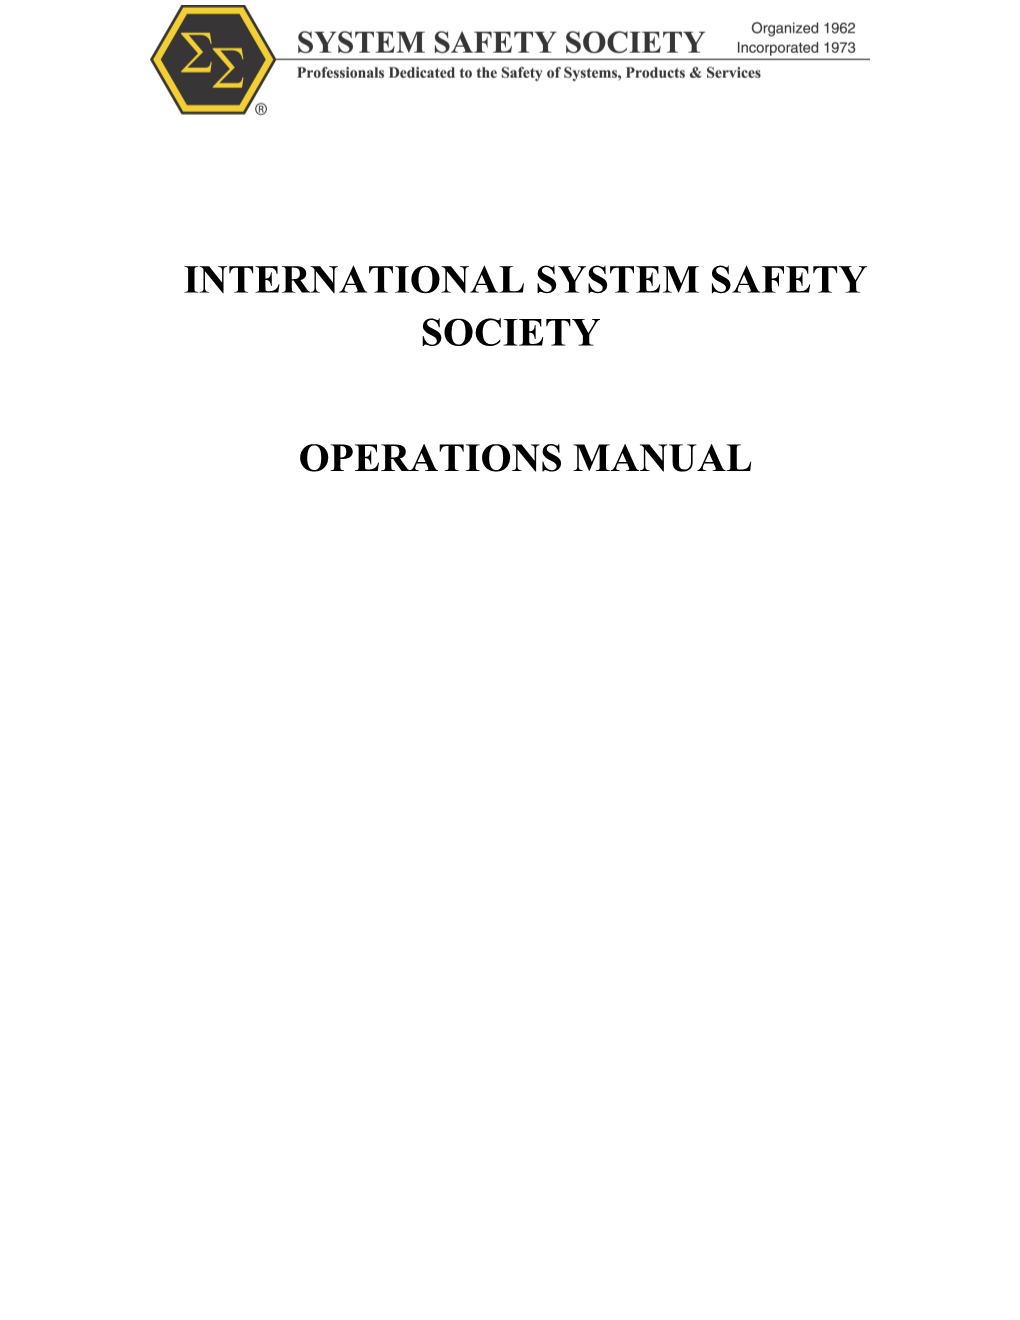 ISSS Operations Manual